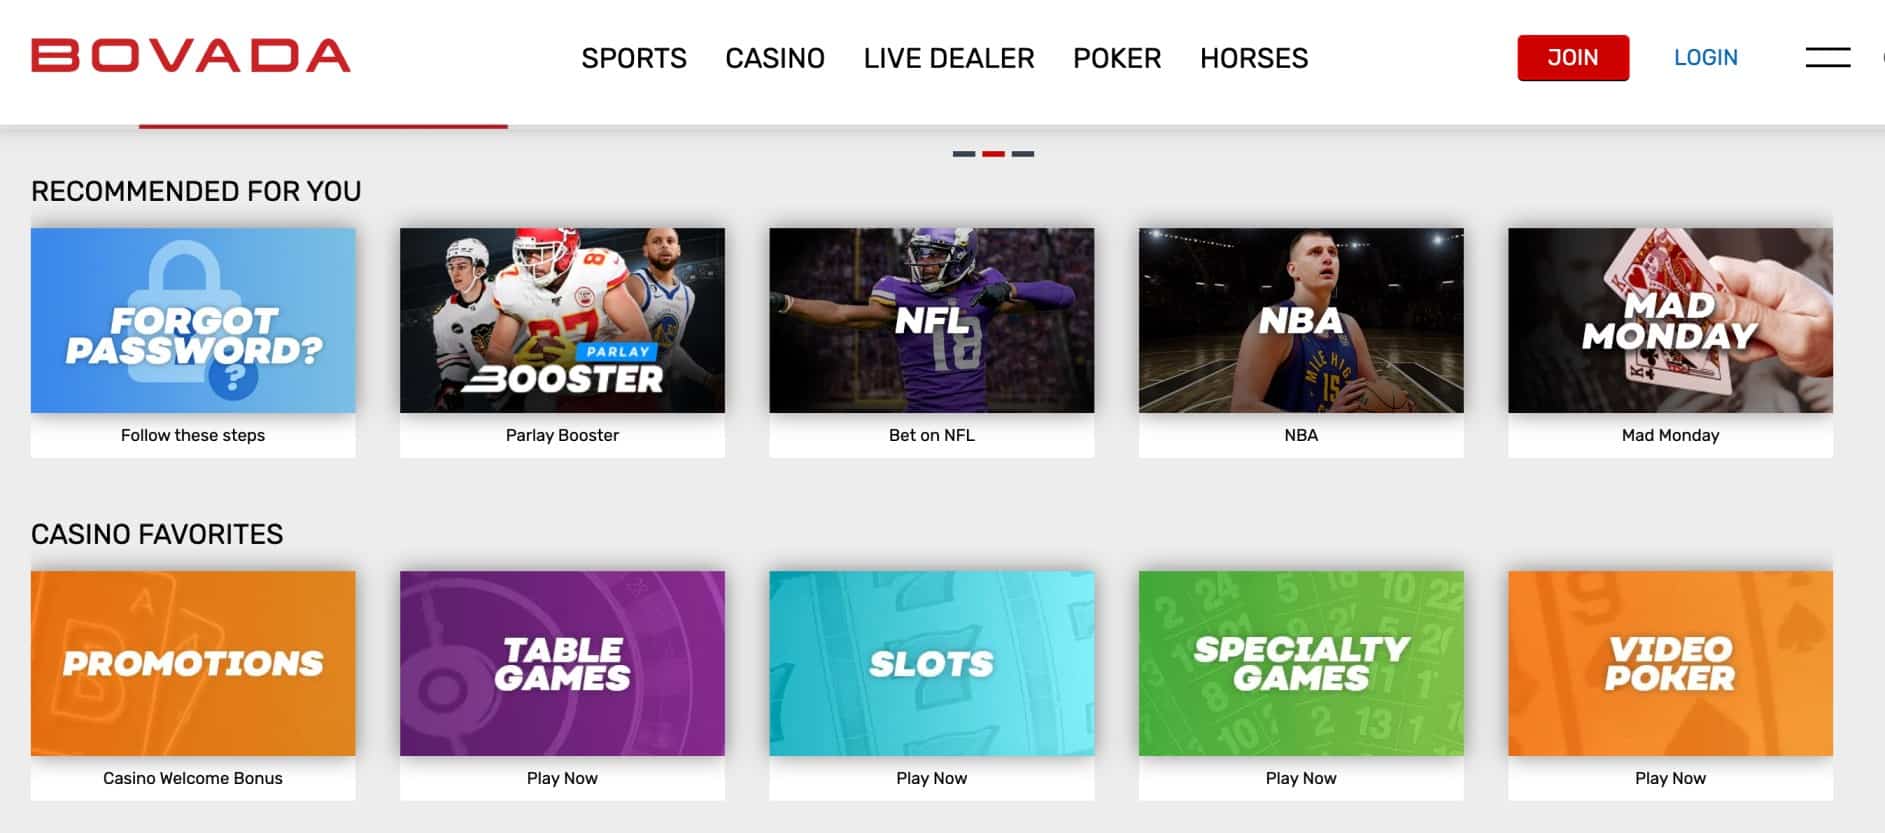 What is Bovada Casino?